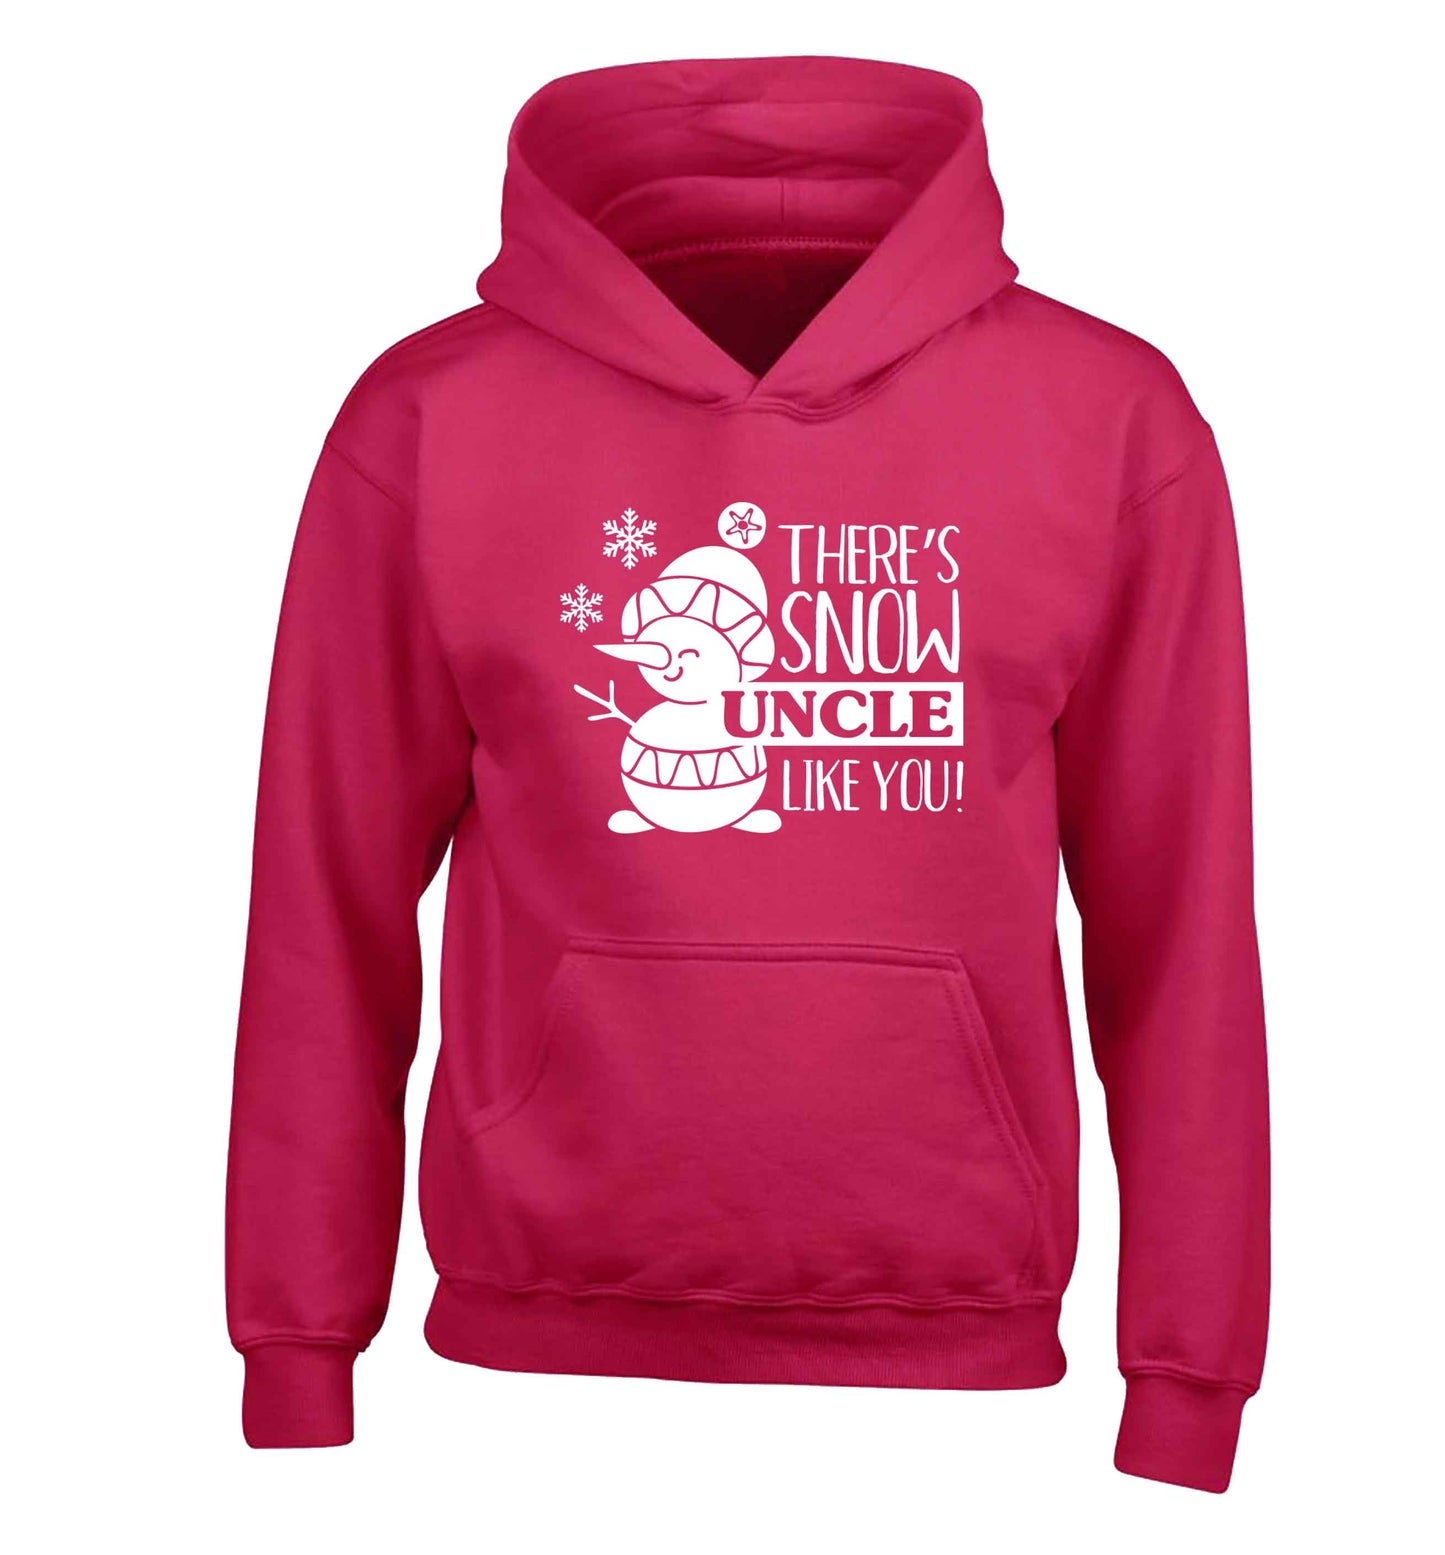 There's snow uncle like you children's pink hoodie 12-13 Years